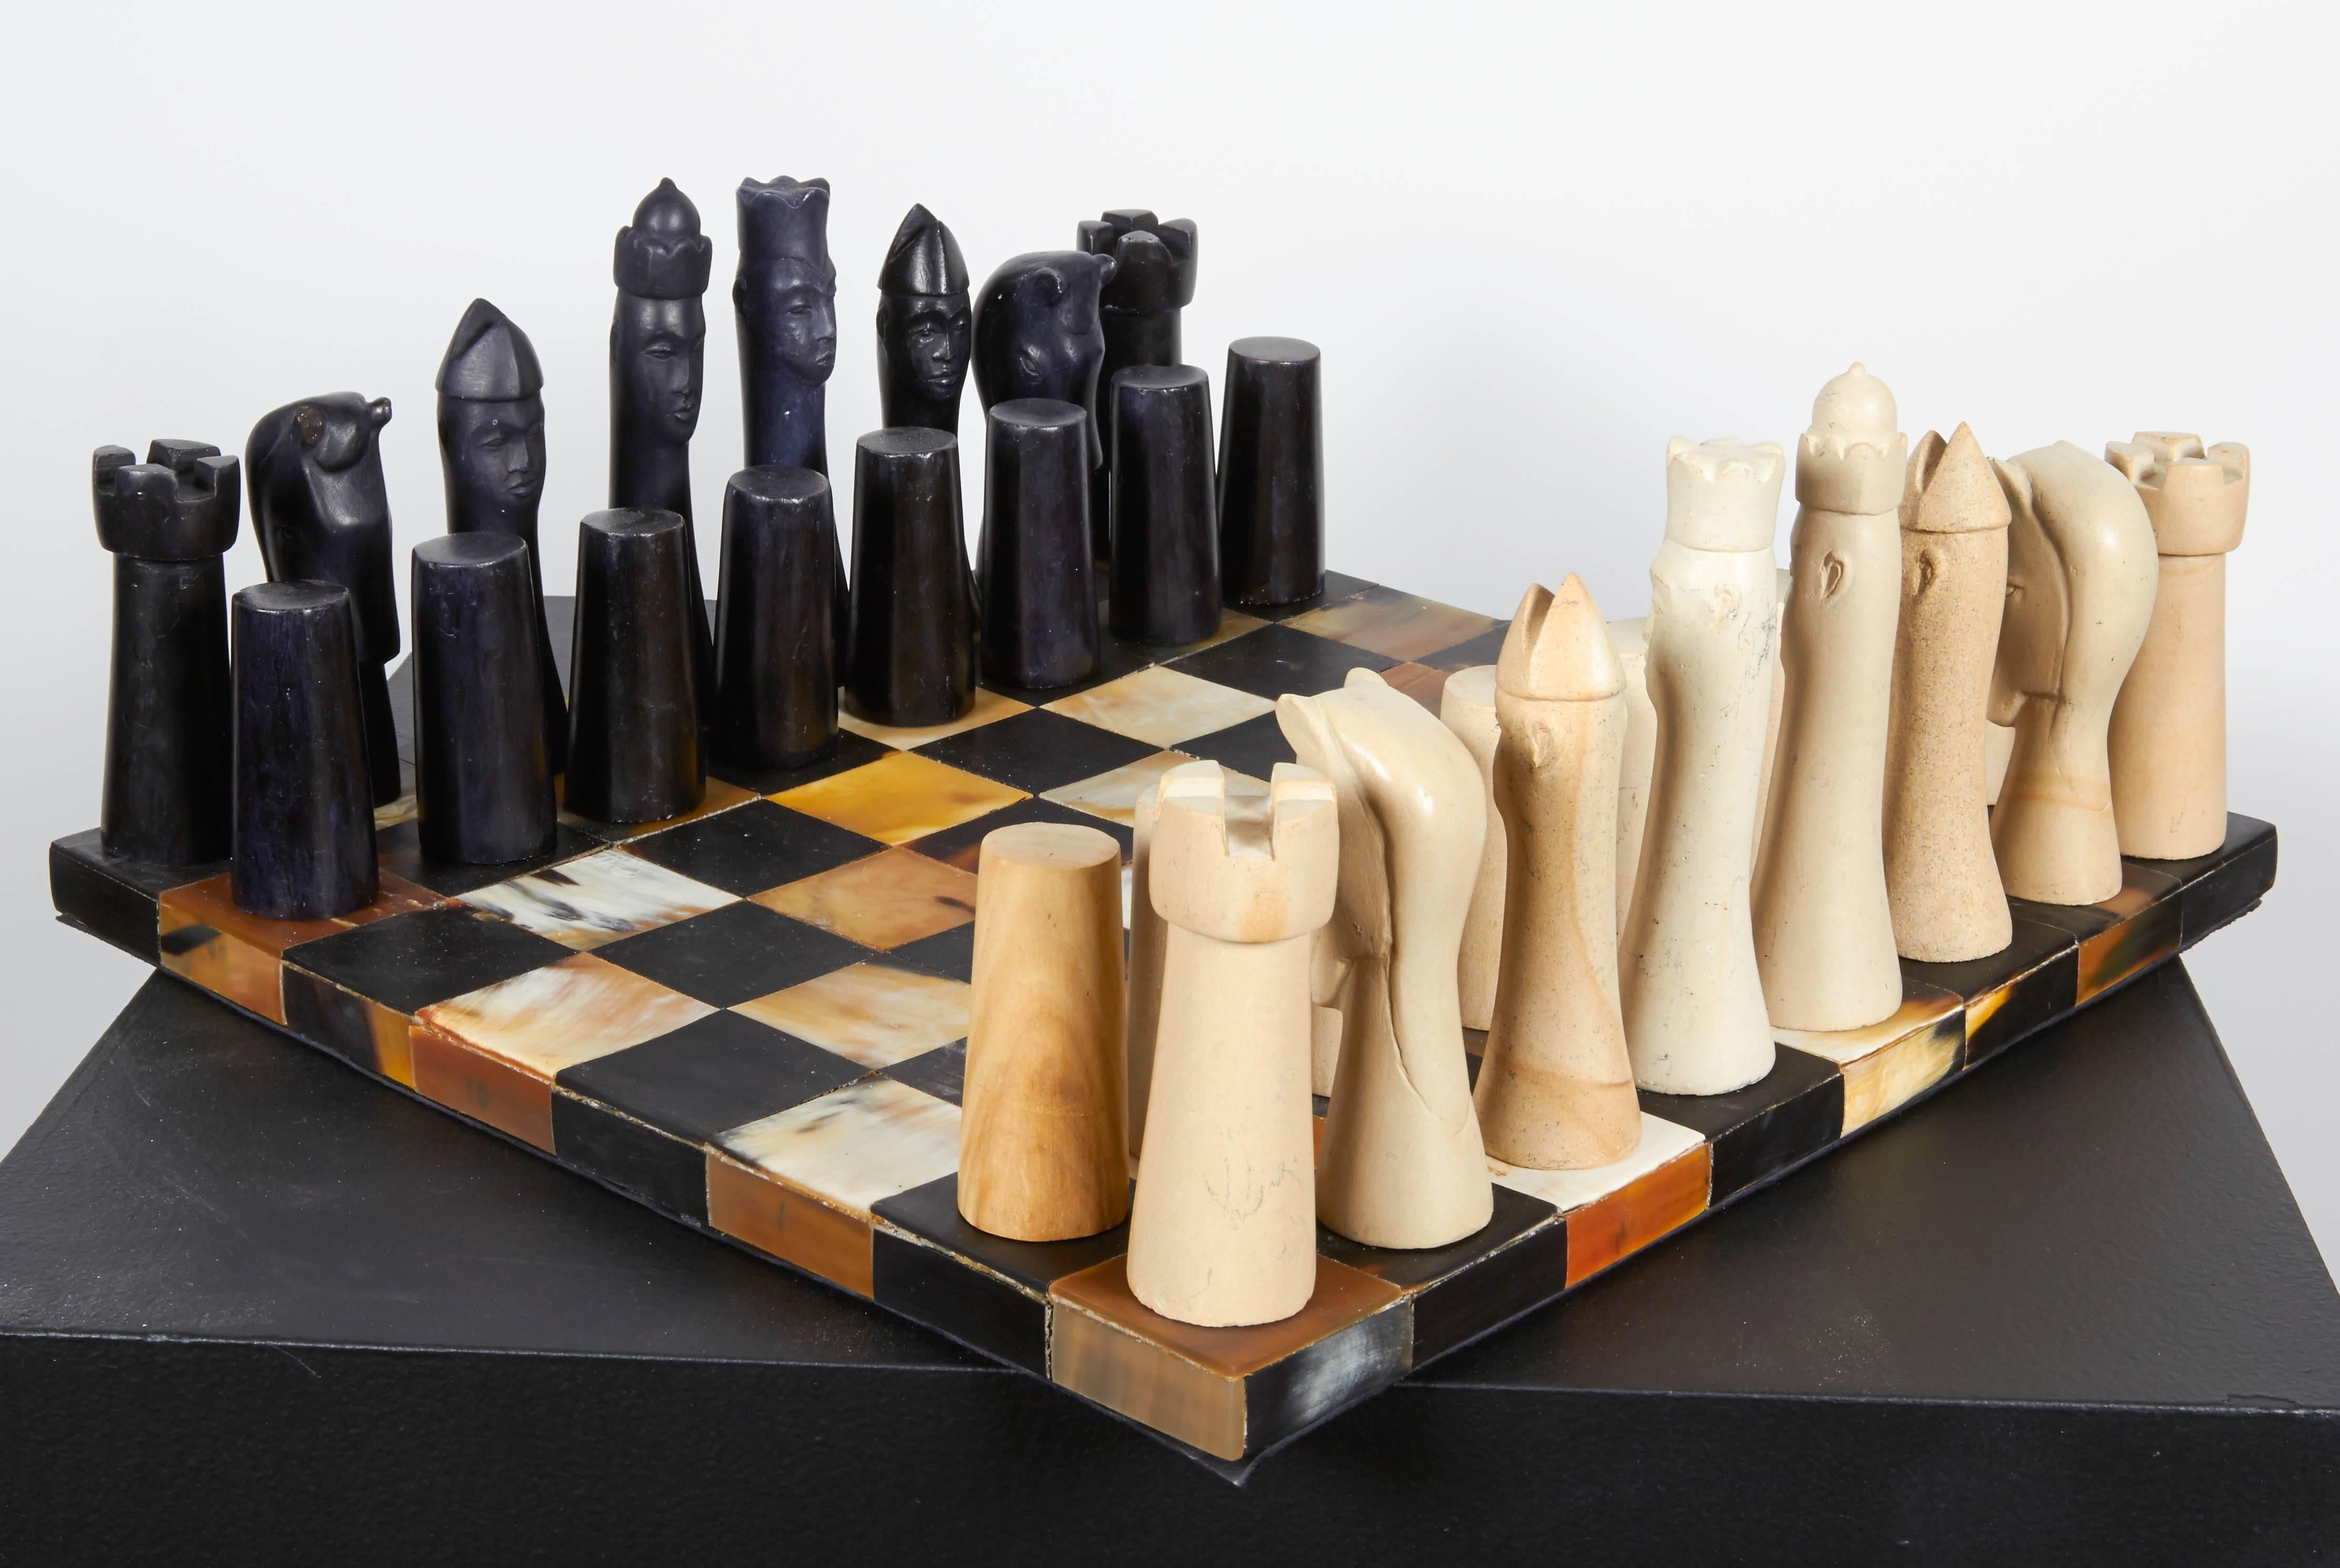 This sustainable horn-and-stone chess set is an Exclusive Design inspired by the bridge between past and future. Each chess piece is hand-carved out of stone. Local Haitian craftsmen have collaborated with D.O.T, the Design, organization and